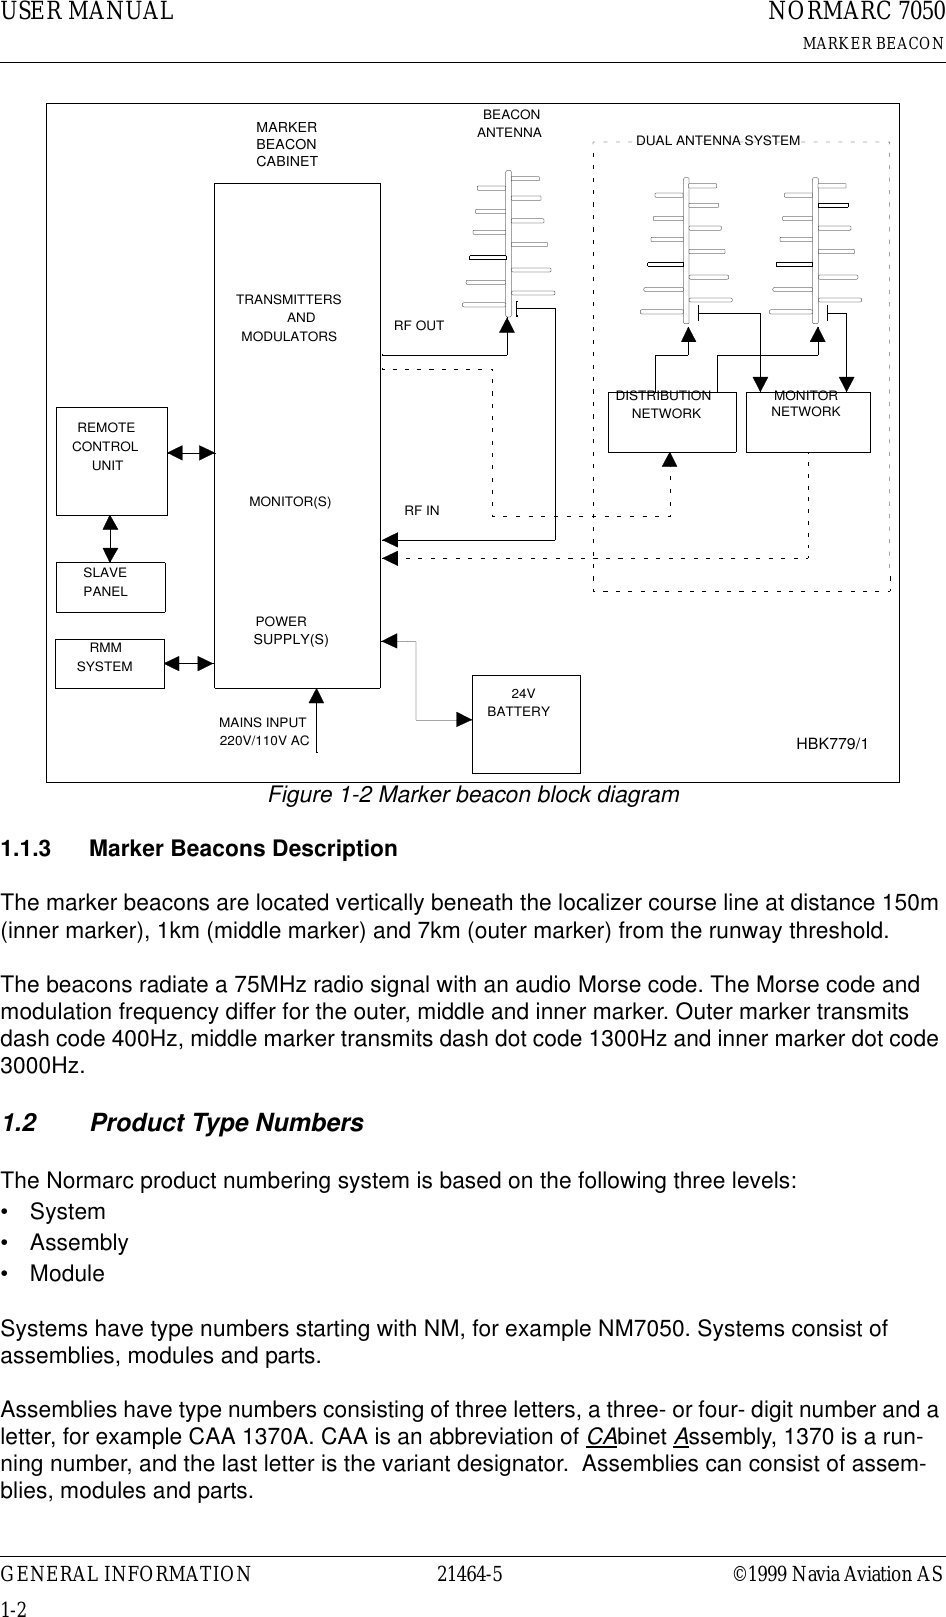 USER MANUAL1-221464-5NORMARC 7050MARKER BEACONGENERAL INFORMATION ©1999 Navia Aviation ASFigure 1-2 Marker beacon block diagram1.1.3 Marker Beacons DescriptionThe marker beacons are located vertically beneath the localizer course line at distance 150m (inner marker), 1km (middle marker) and 7km (outer marker) from the runway threshold. The beacons radiate a 75MHz radio signal with an audio Morse code. The Morse code and modulation frequency differ for the outer, middle and inner marker. Outer marker transmits dash code 400Hz, middle marker transmits dash dot code 1300Hz and inner marker dot code 3000Hz.1.2 Product Type NumbersThe Normarc product numbering system is based on the following three levels:•System• Assembly• ModuleSystems have type numbers starting with NM, for example NM7050. Systems consist of assemblies, modules and parts.Assemblies have type numbers consisting of three letters, a three- or four- digit number and a letter, for example CAA 1370A. CAA is an abbreviation of CAbinet Assembly, 1370 is a run-ning number, and the last letter is the variant designator.  Assemblies can consist of assem-blies, modules and parts.REMOTECONTROLUNITSLAVEPANELRMMSYSTEMTRANSMITTERSANDMODULATORS24VBATTERYMONITOR(S)POWERSUPPLY(S)MAINS INPUT220V/110V ACBEACONANTENNAMARKERBEACON CABINETDISTRIBUTIONNETWORKMONITORNETWORKRF OUTRF INDUAL ANTENNA SYSTEMHBK779/1